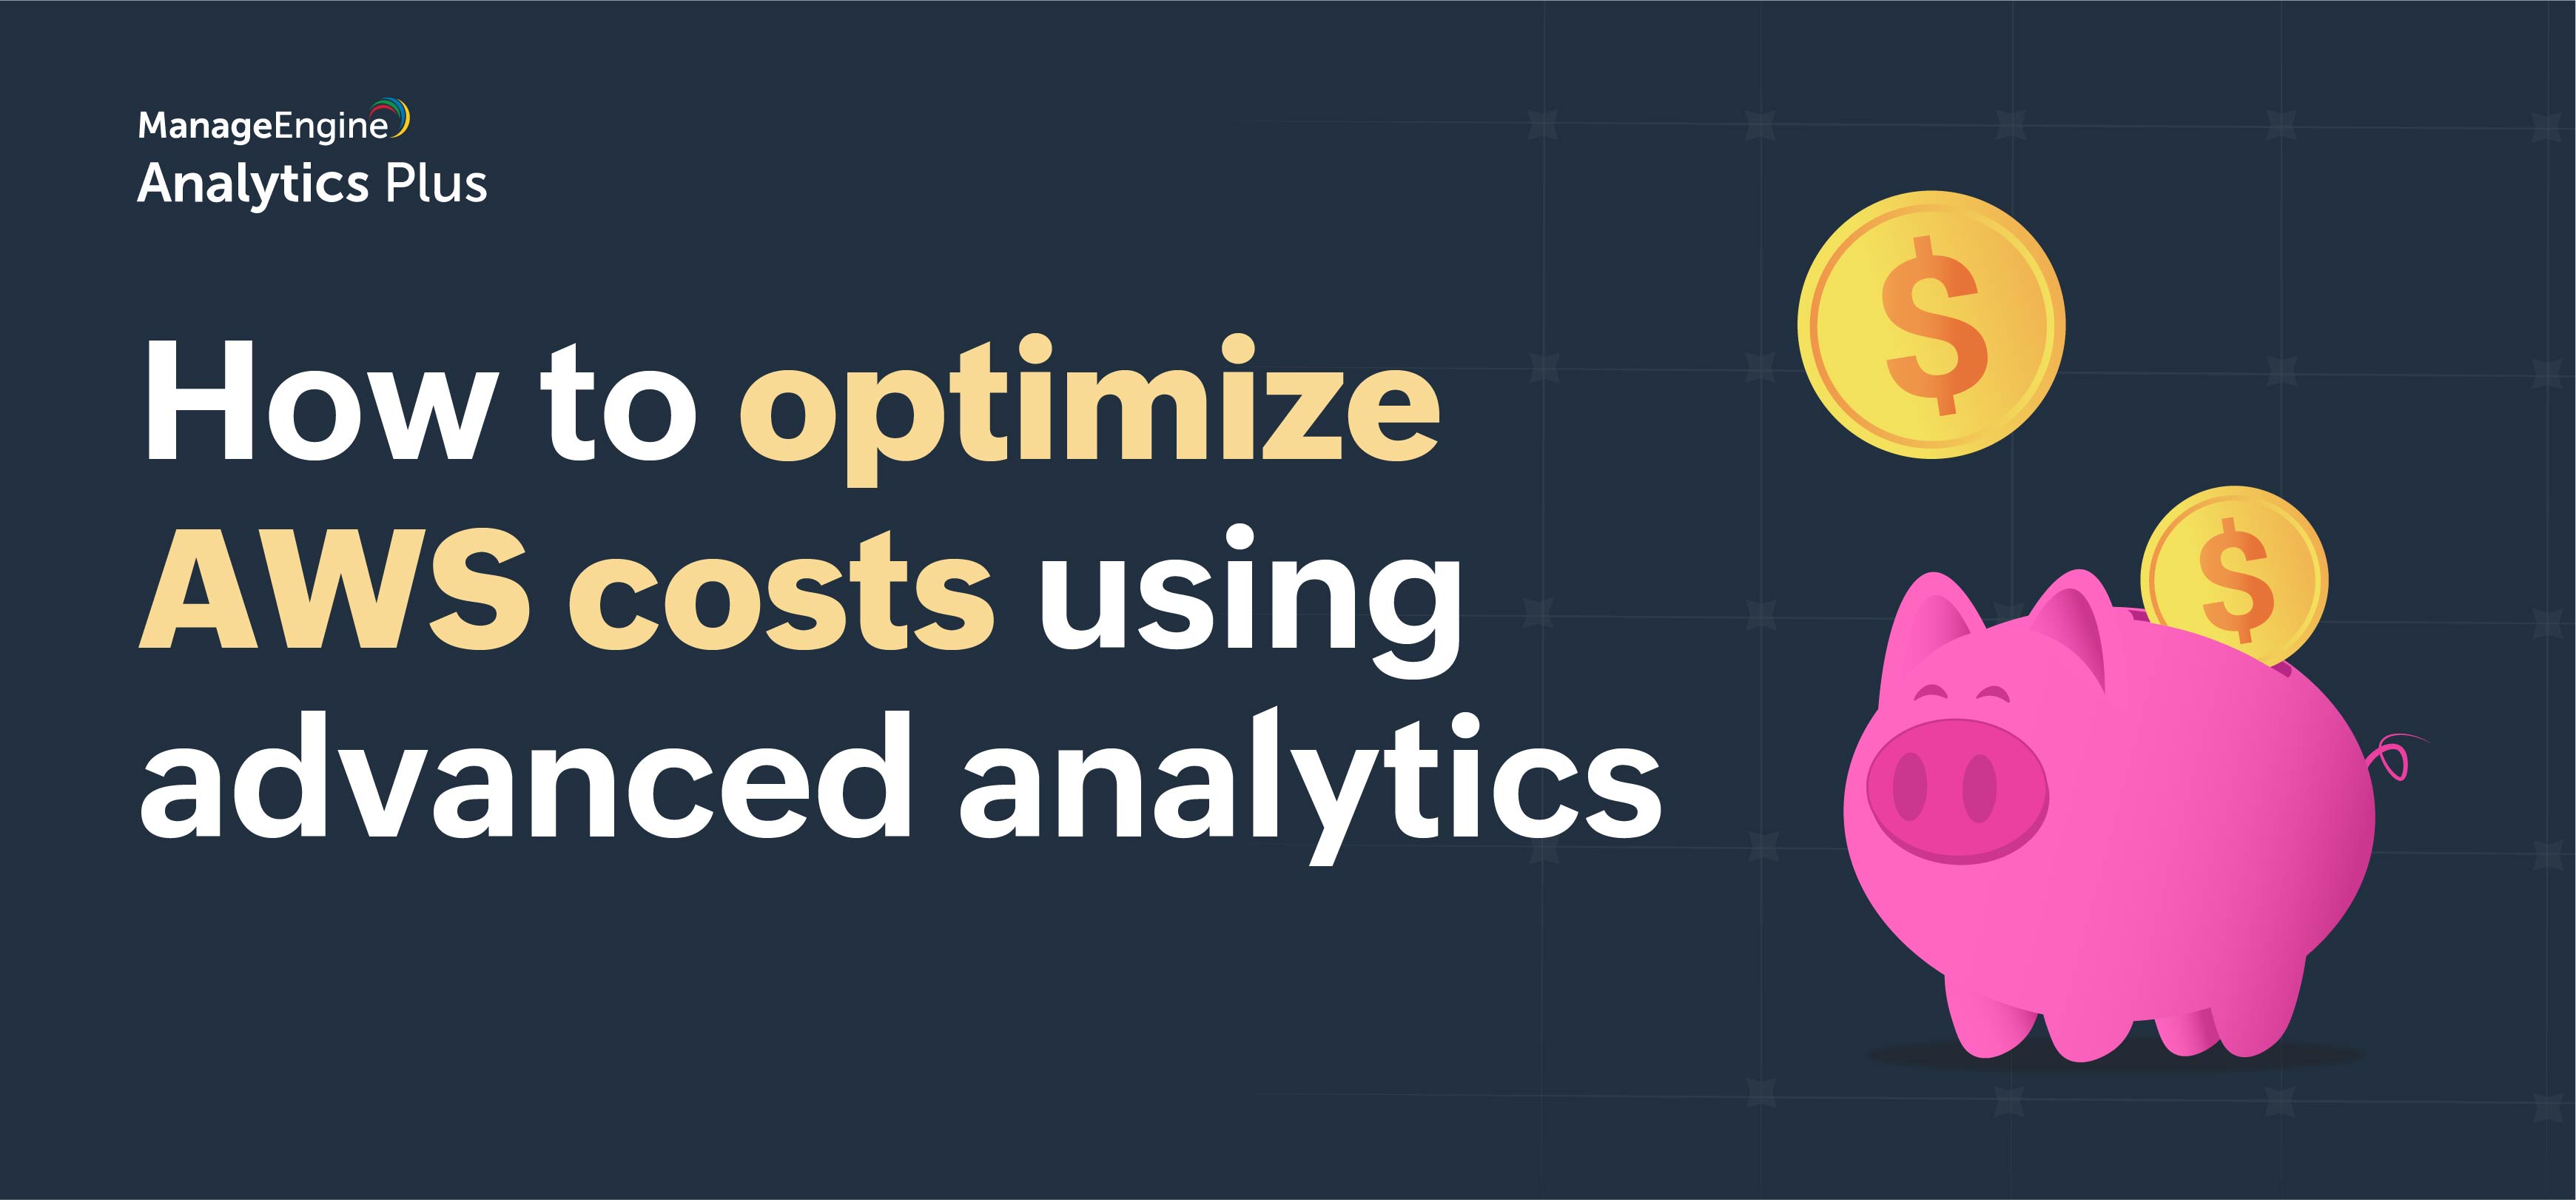 How to optimize AWS cloud costs using advanced analytics